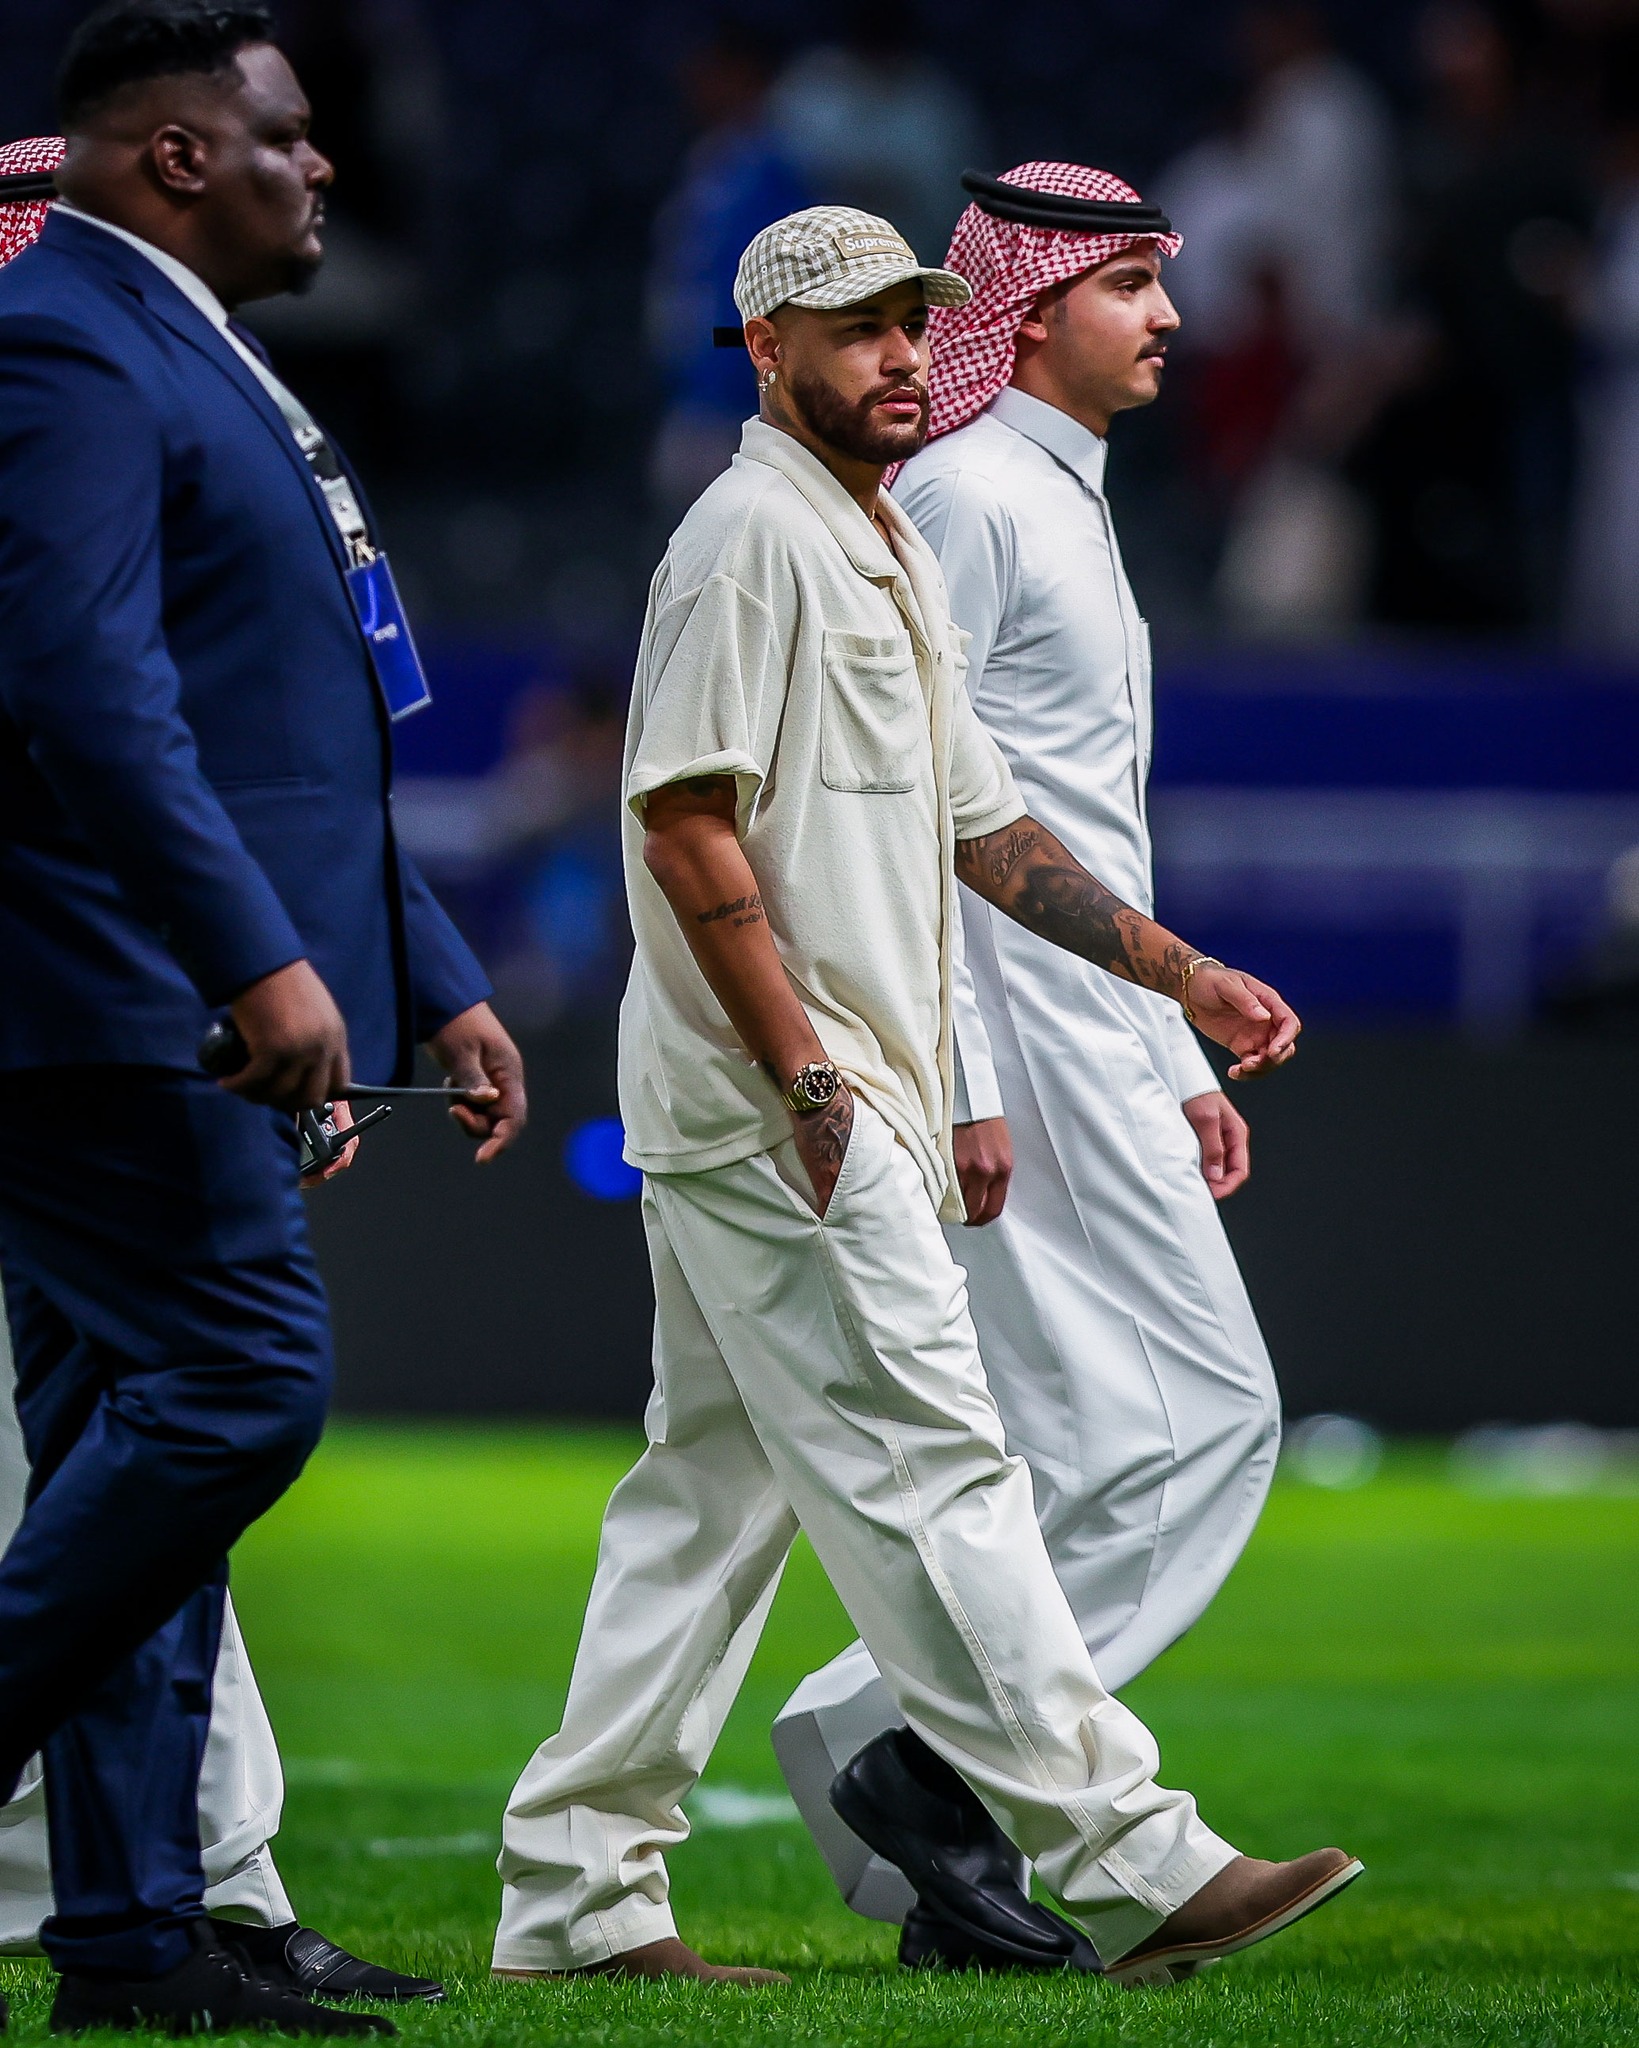 Neymar Makes Triumphant Return to Al-Hilal Following ACL and Meniscus Injury